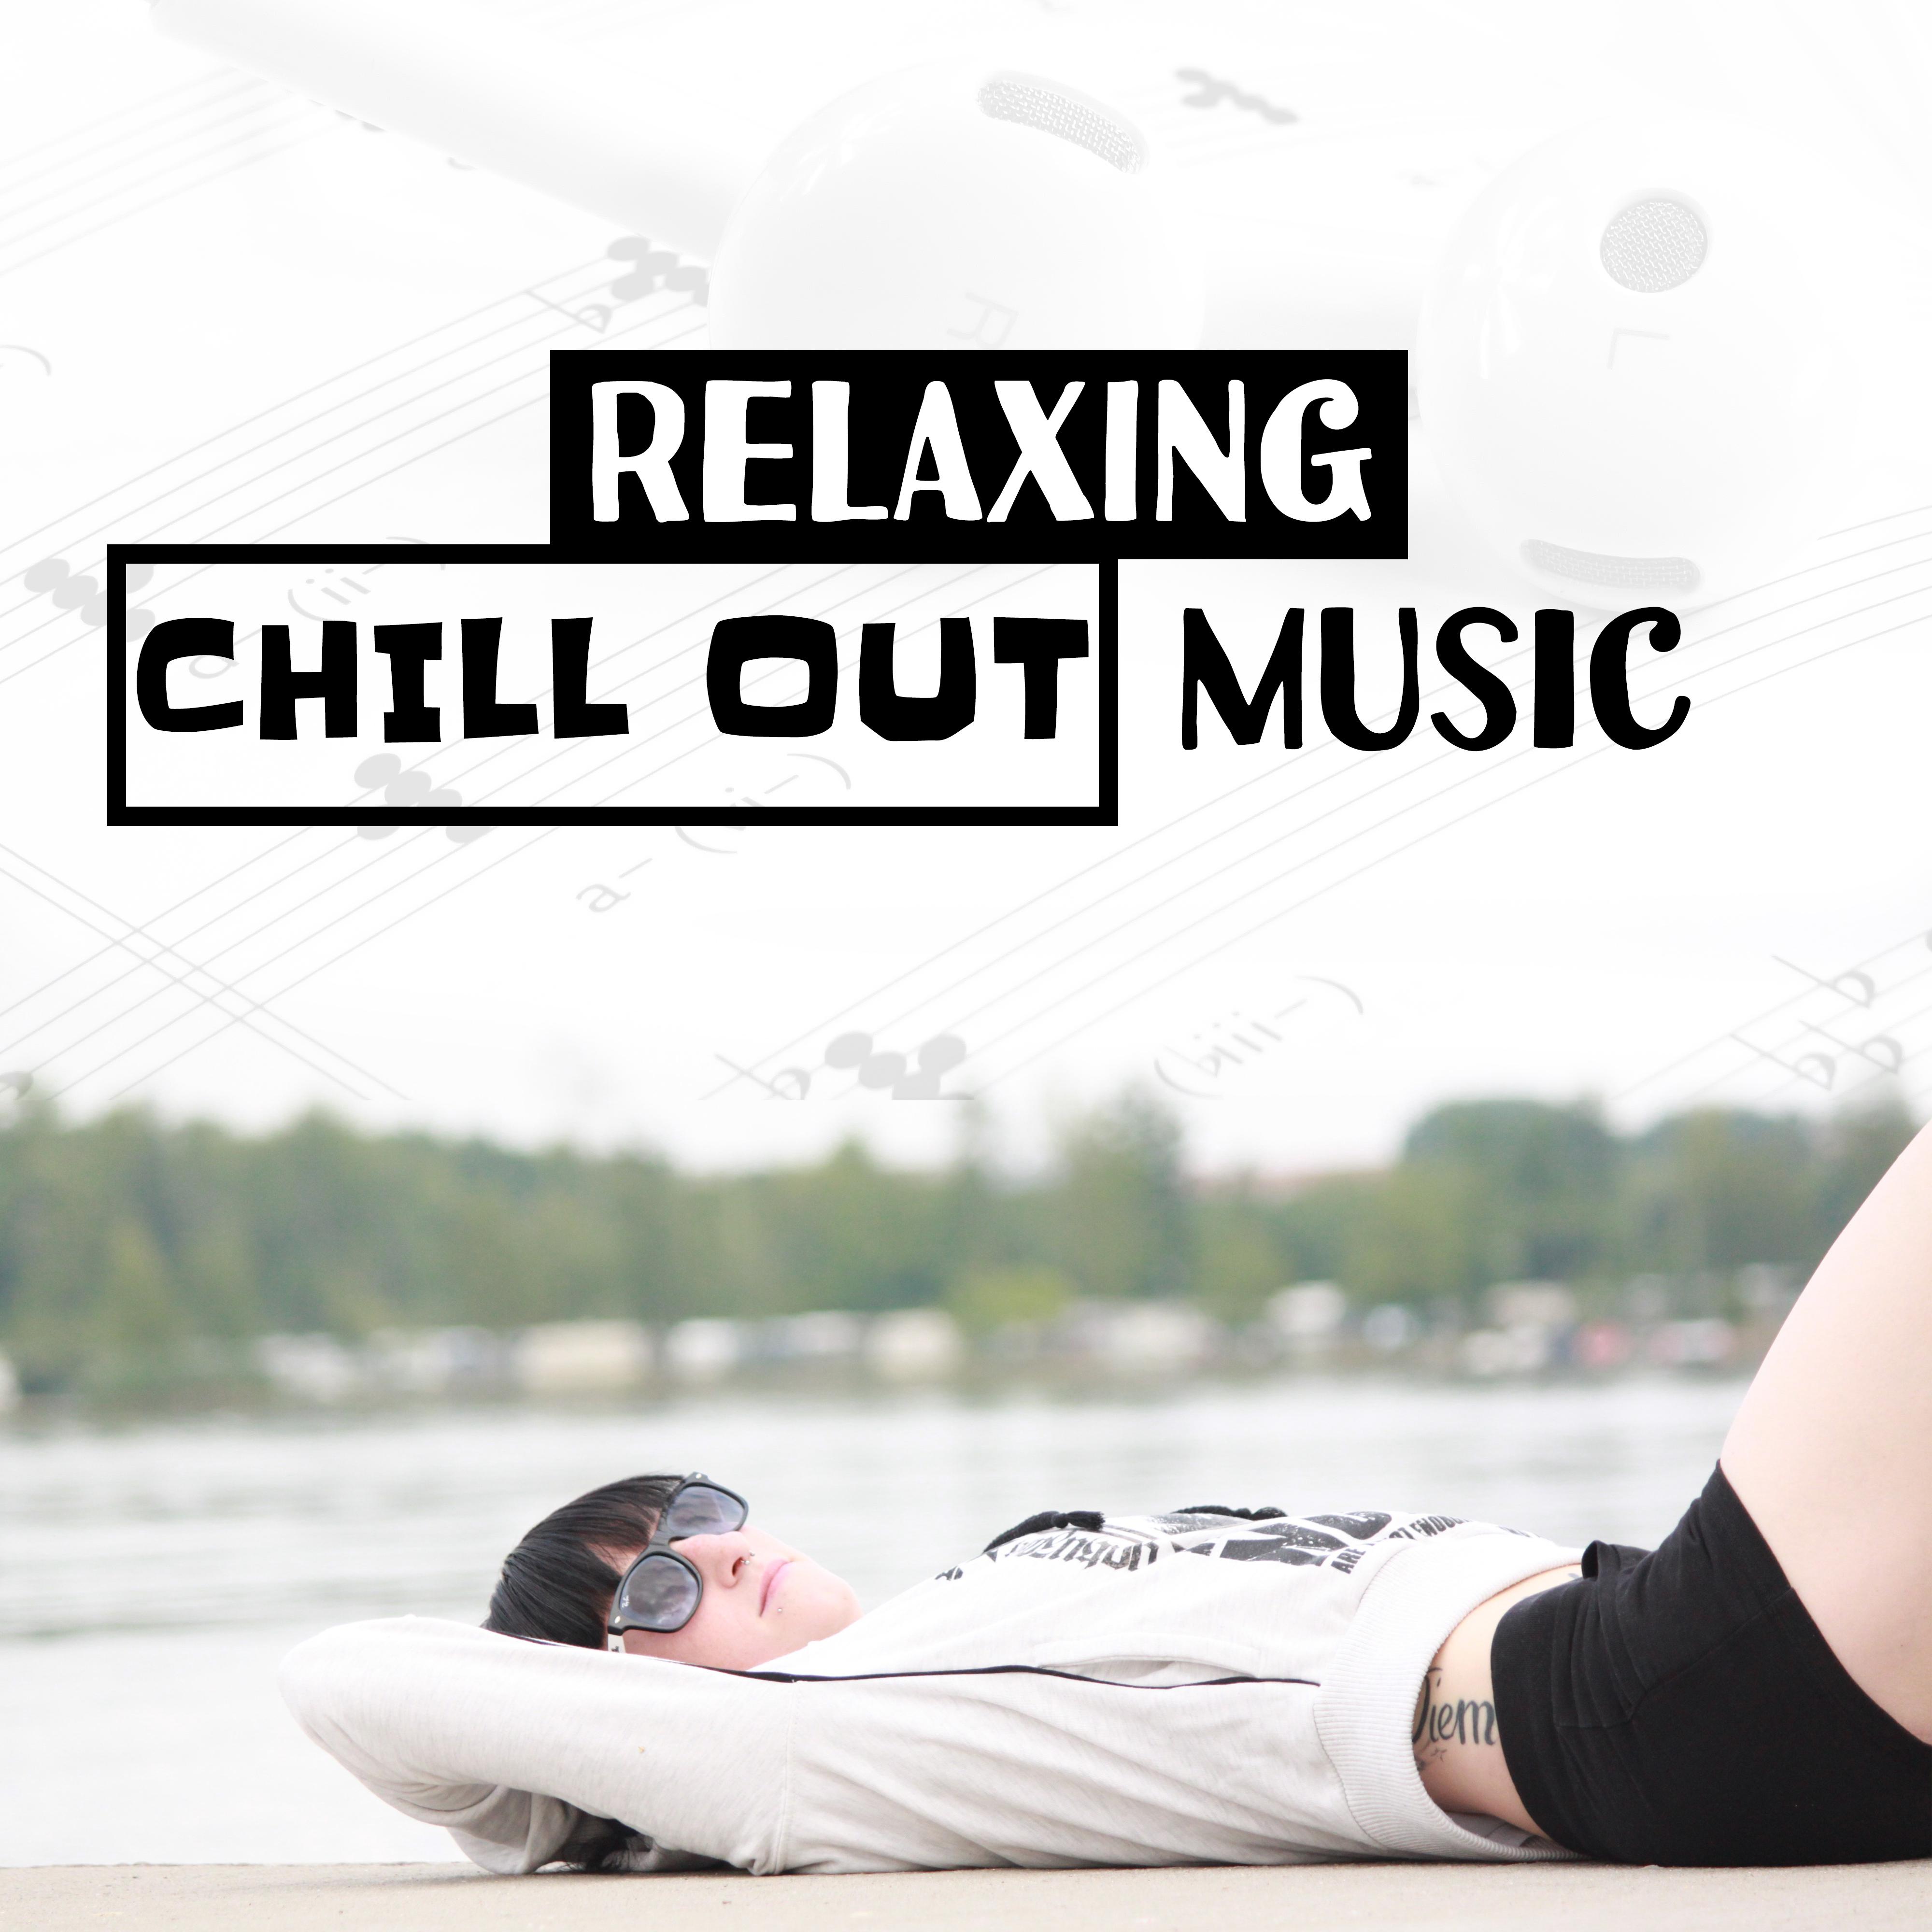 Relaxing Chill Out Music  Soft Sounds to Relax, Holiday Sounds, Summer Vibes, Beach Lounge